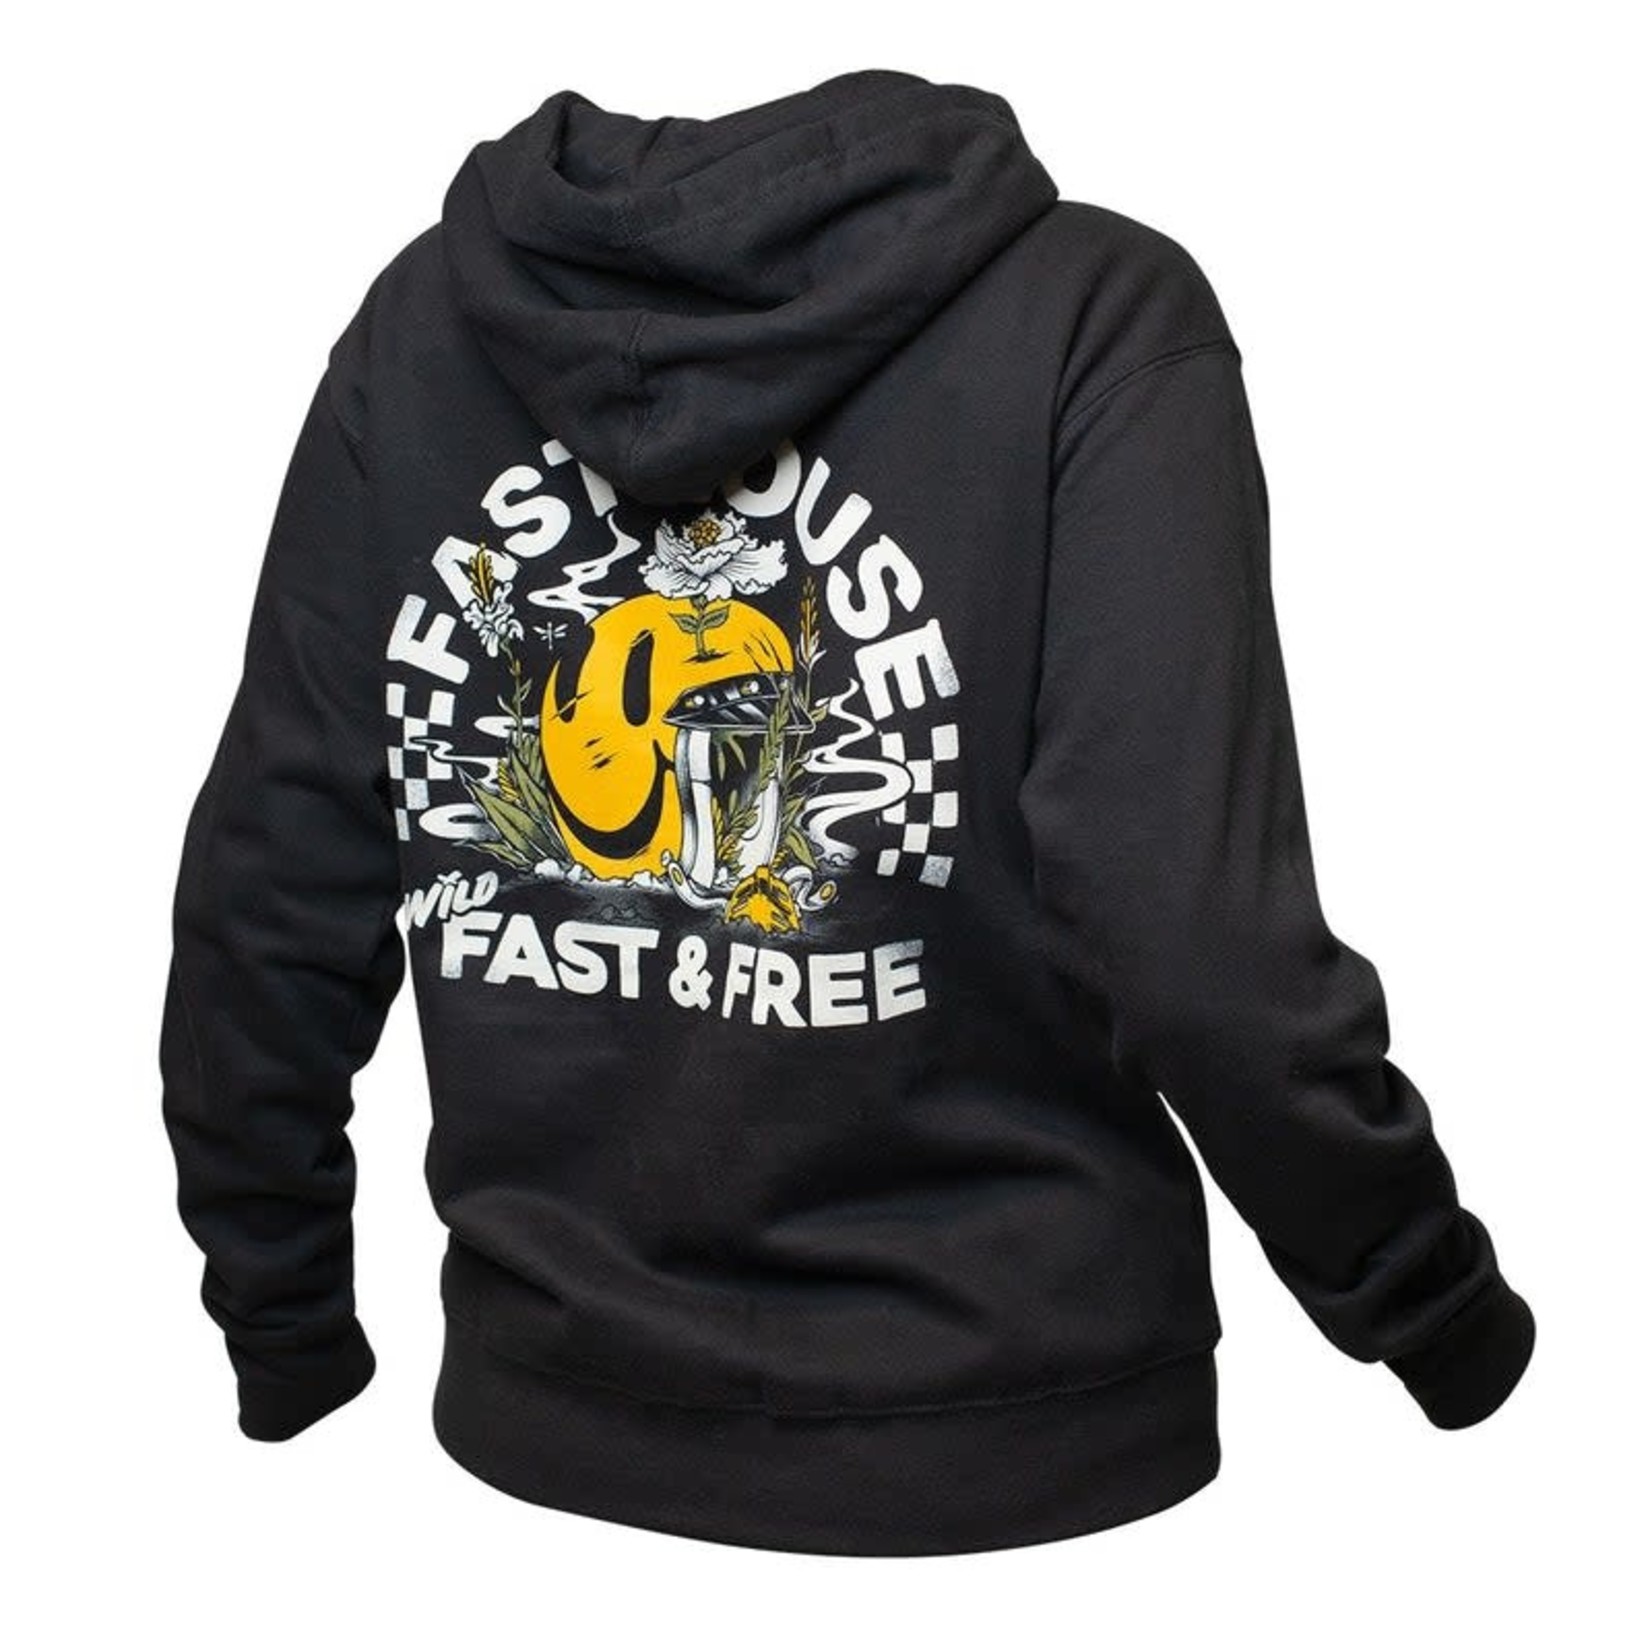 FASTHOUSE Women's Wild One Hooded Pullover Black